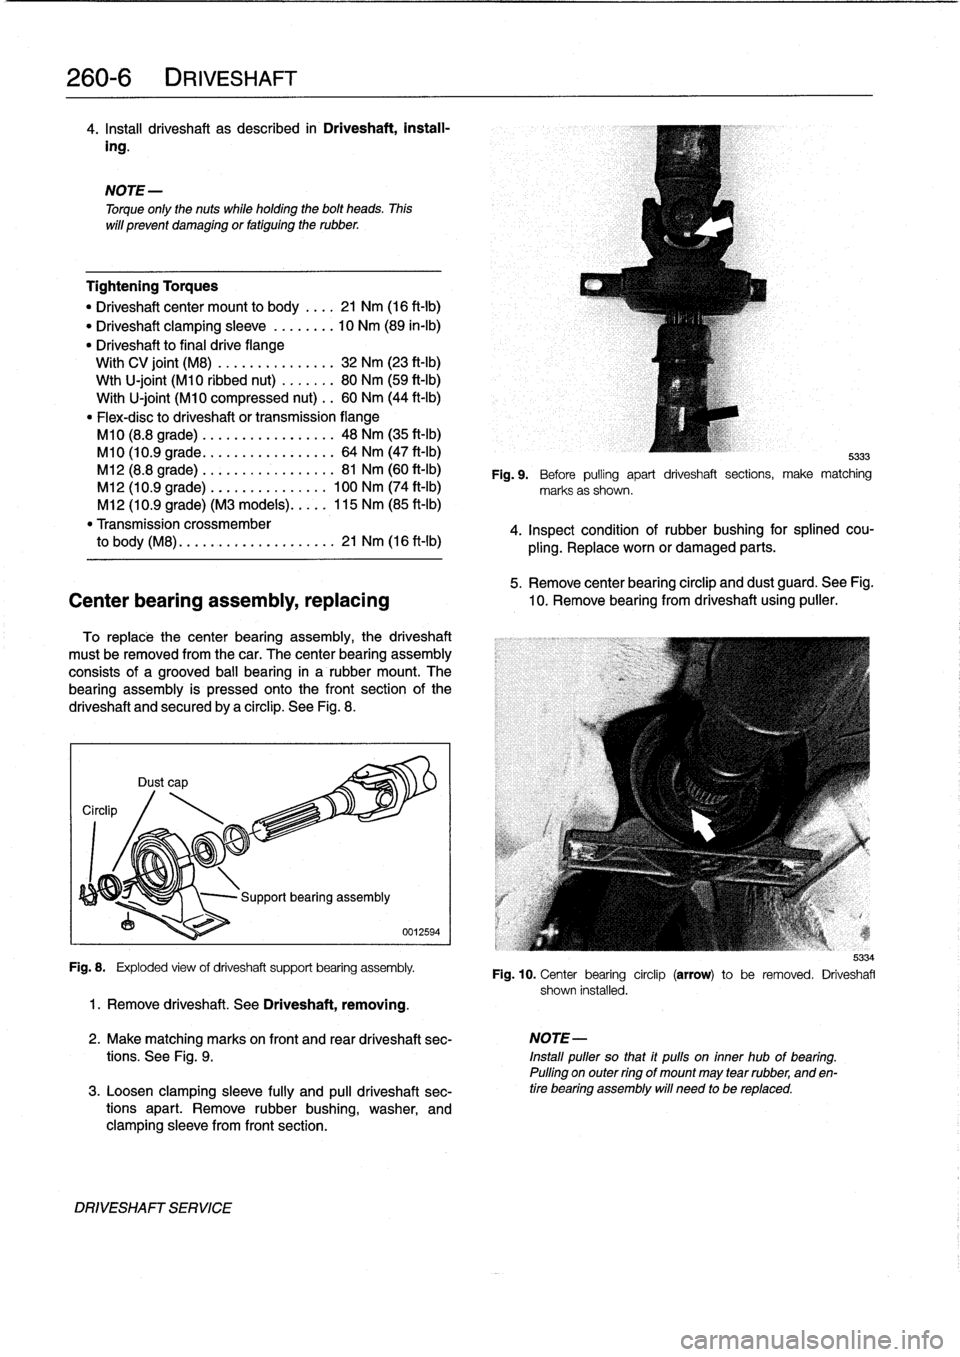 BMW 323i 1997 E36 Workshop Manual 
260-
6
DRIVESHAFT

4
.
Insta¡¡
driveshaft
as
described
in
Driveshaft,
install-

ing
.

Tightening
Torques

"
Driveshaft
center
mount
to
body
.
...
21
Nm
(16
ft-Ib)

"
Driveshaft
clamping
sleeve
...